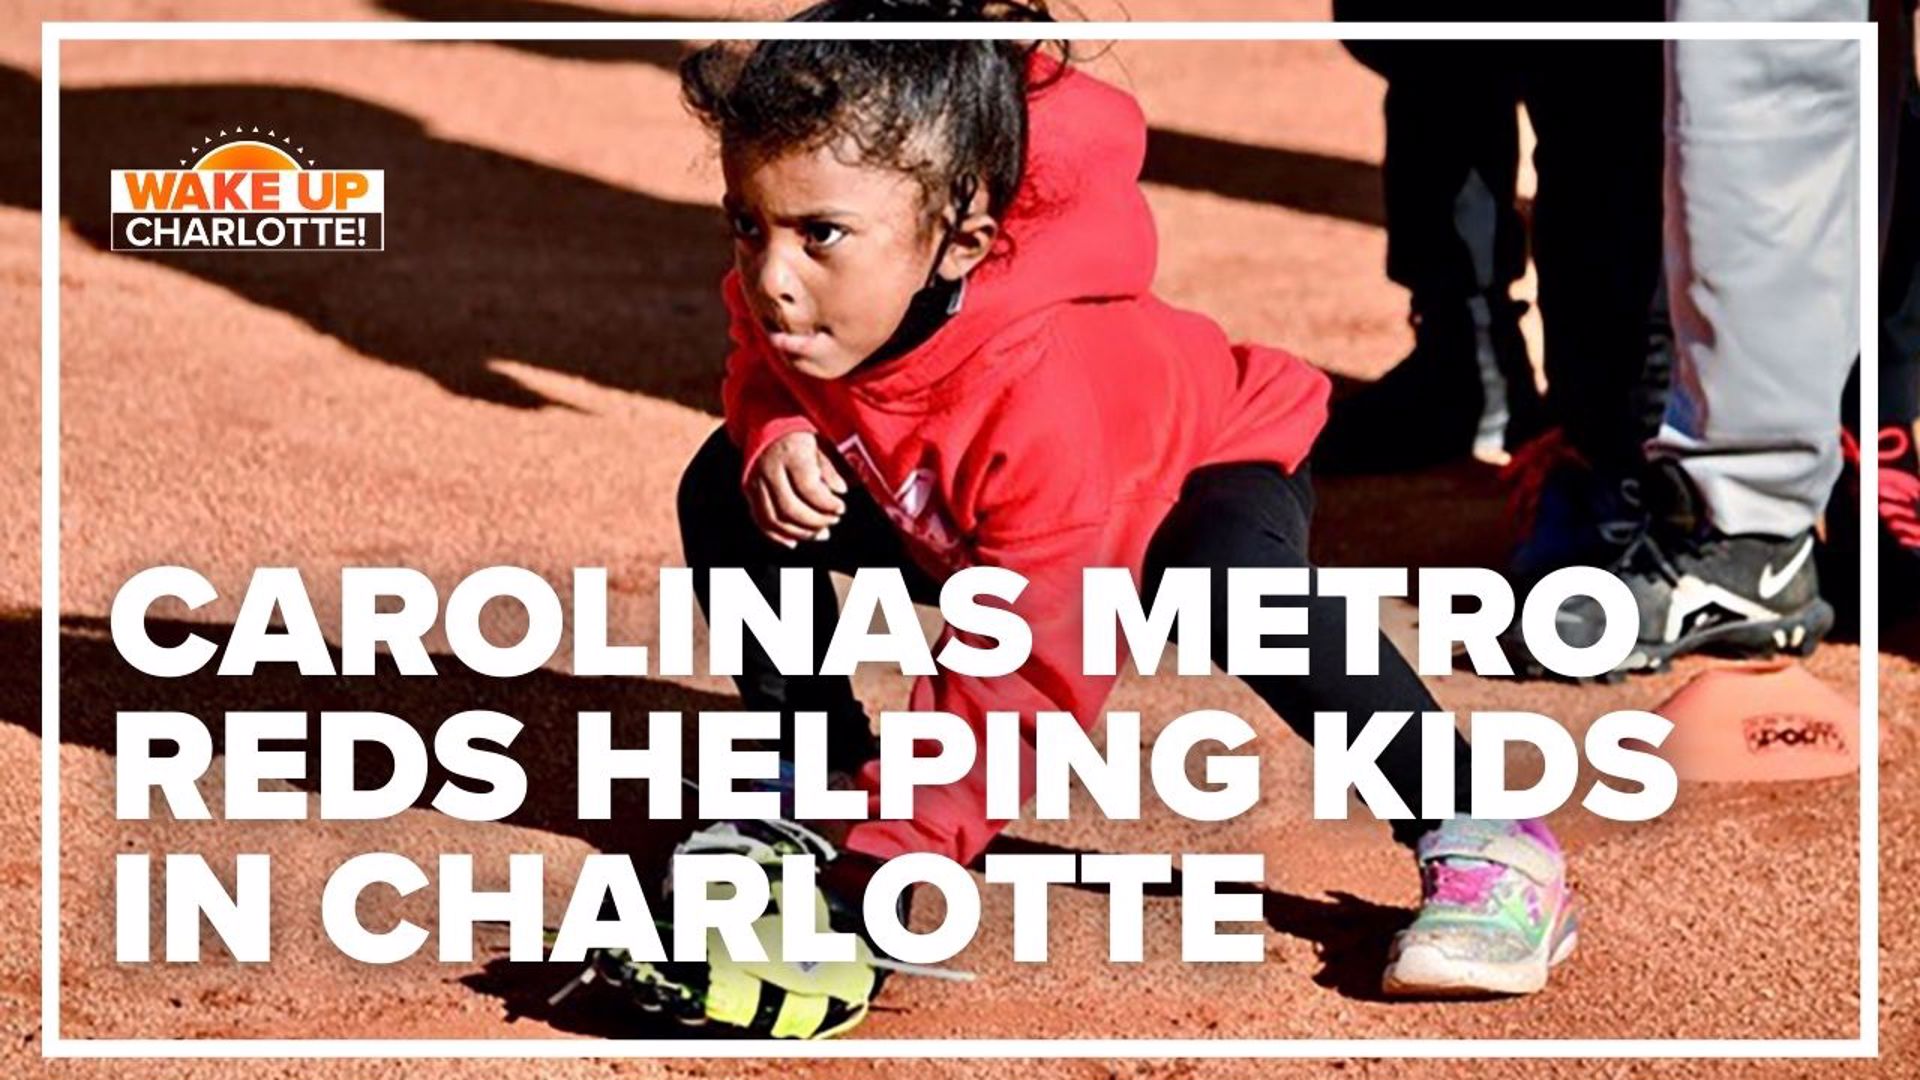 WCNC Charlotte is teaming up with Carolinas Metro Reds to help underserved kids develop life skills through baseball. Here's how you can help.